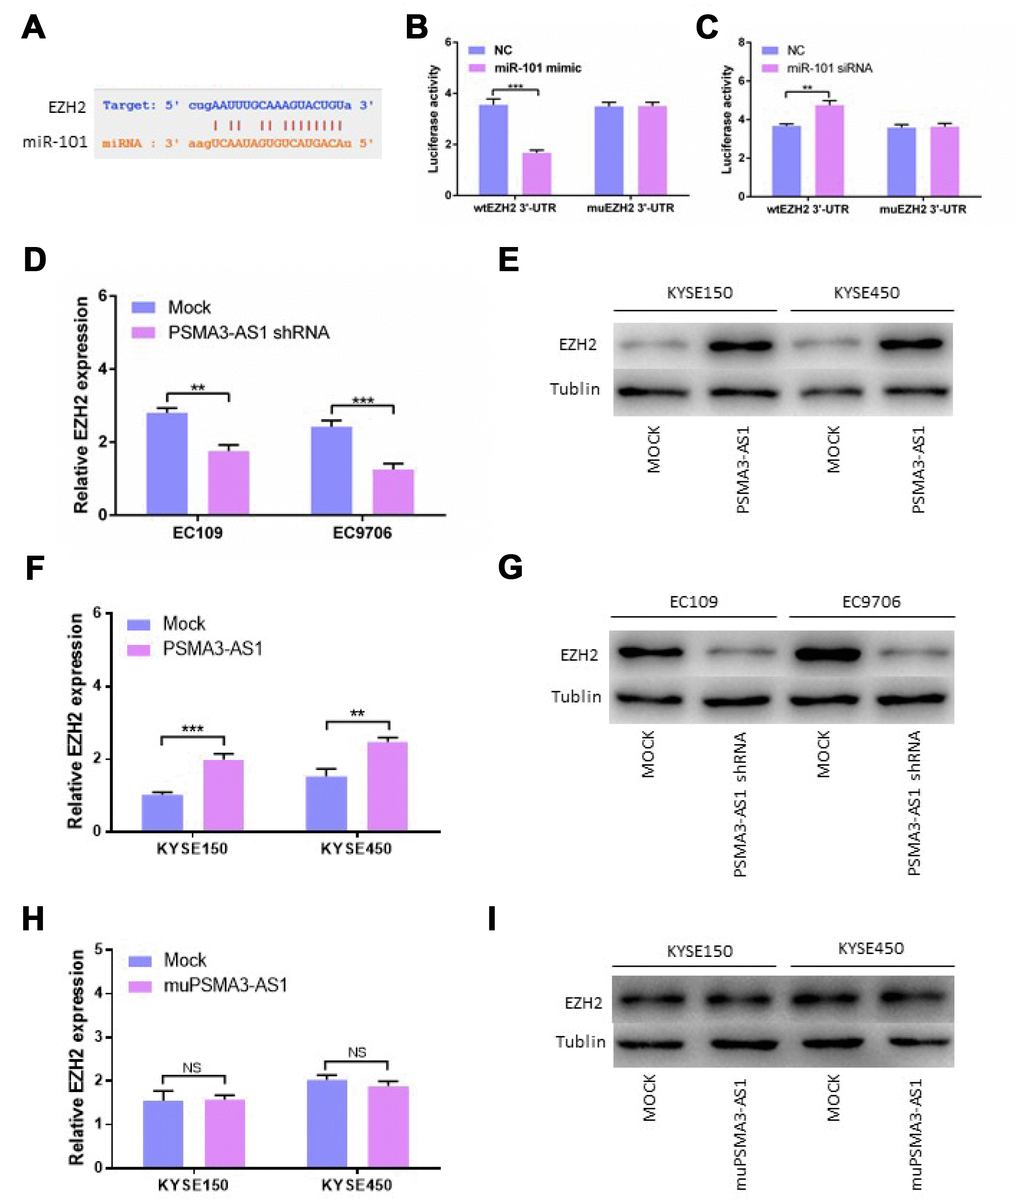 PSMA3-AS1 restores EZH2 expression by binding to miR-101. (A) Target sequences in the EZH2 3′-UTR predicted to bind to miR-101. (B) Wild-type or mutated 3′-UTRwas transfected into HEK-293T cells with miR-101 or a negative control. Luciferase activity was detected 48 h after transfection. (C) Wild-type or mutated 3′-UTRwas transfected into HEK-293T cells with miR-101 siRNA or a negative control. Luciferase activity was detected 48 h after transfection. (D) and (E) EZH2 expression was detected after PSMA3-AS1 expression upregulation in ESCC cells by RT-qPCR and western blotting. (F) and (G) EZH2 expression was detected after PSMA3-AS1 expression donwnregulation in ESCC cells by RT-qPCR and western blotting. (H) and (I) EZH2 expressions was detected after mutant PSMA3-AS1 expression upregulation in ESCC cells by RT-qPCR and western blotting. The data are represented as the mean ± SD, n = 3. *p 